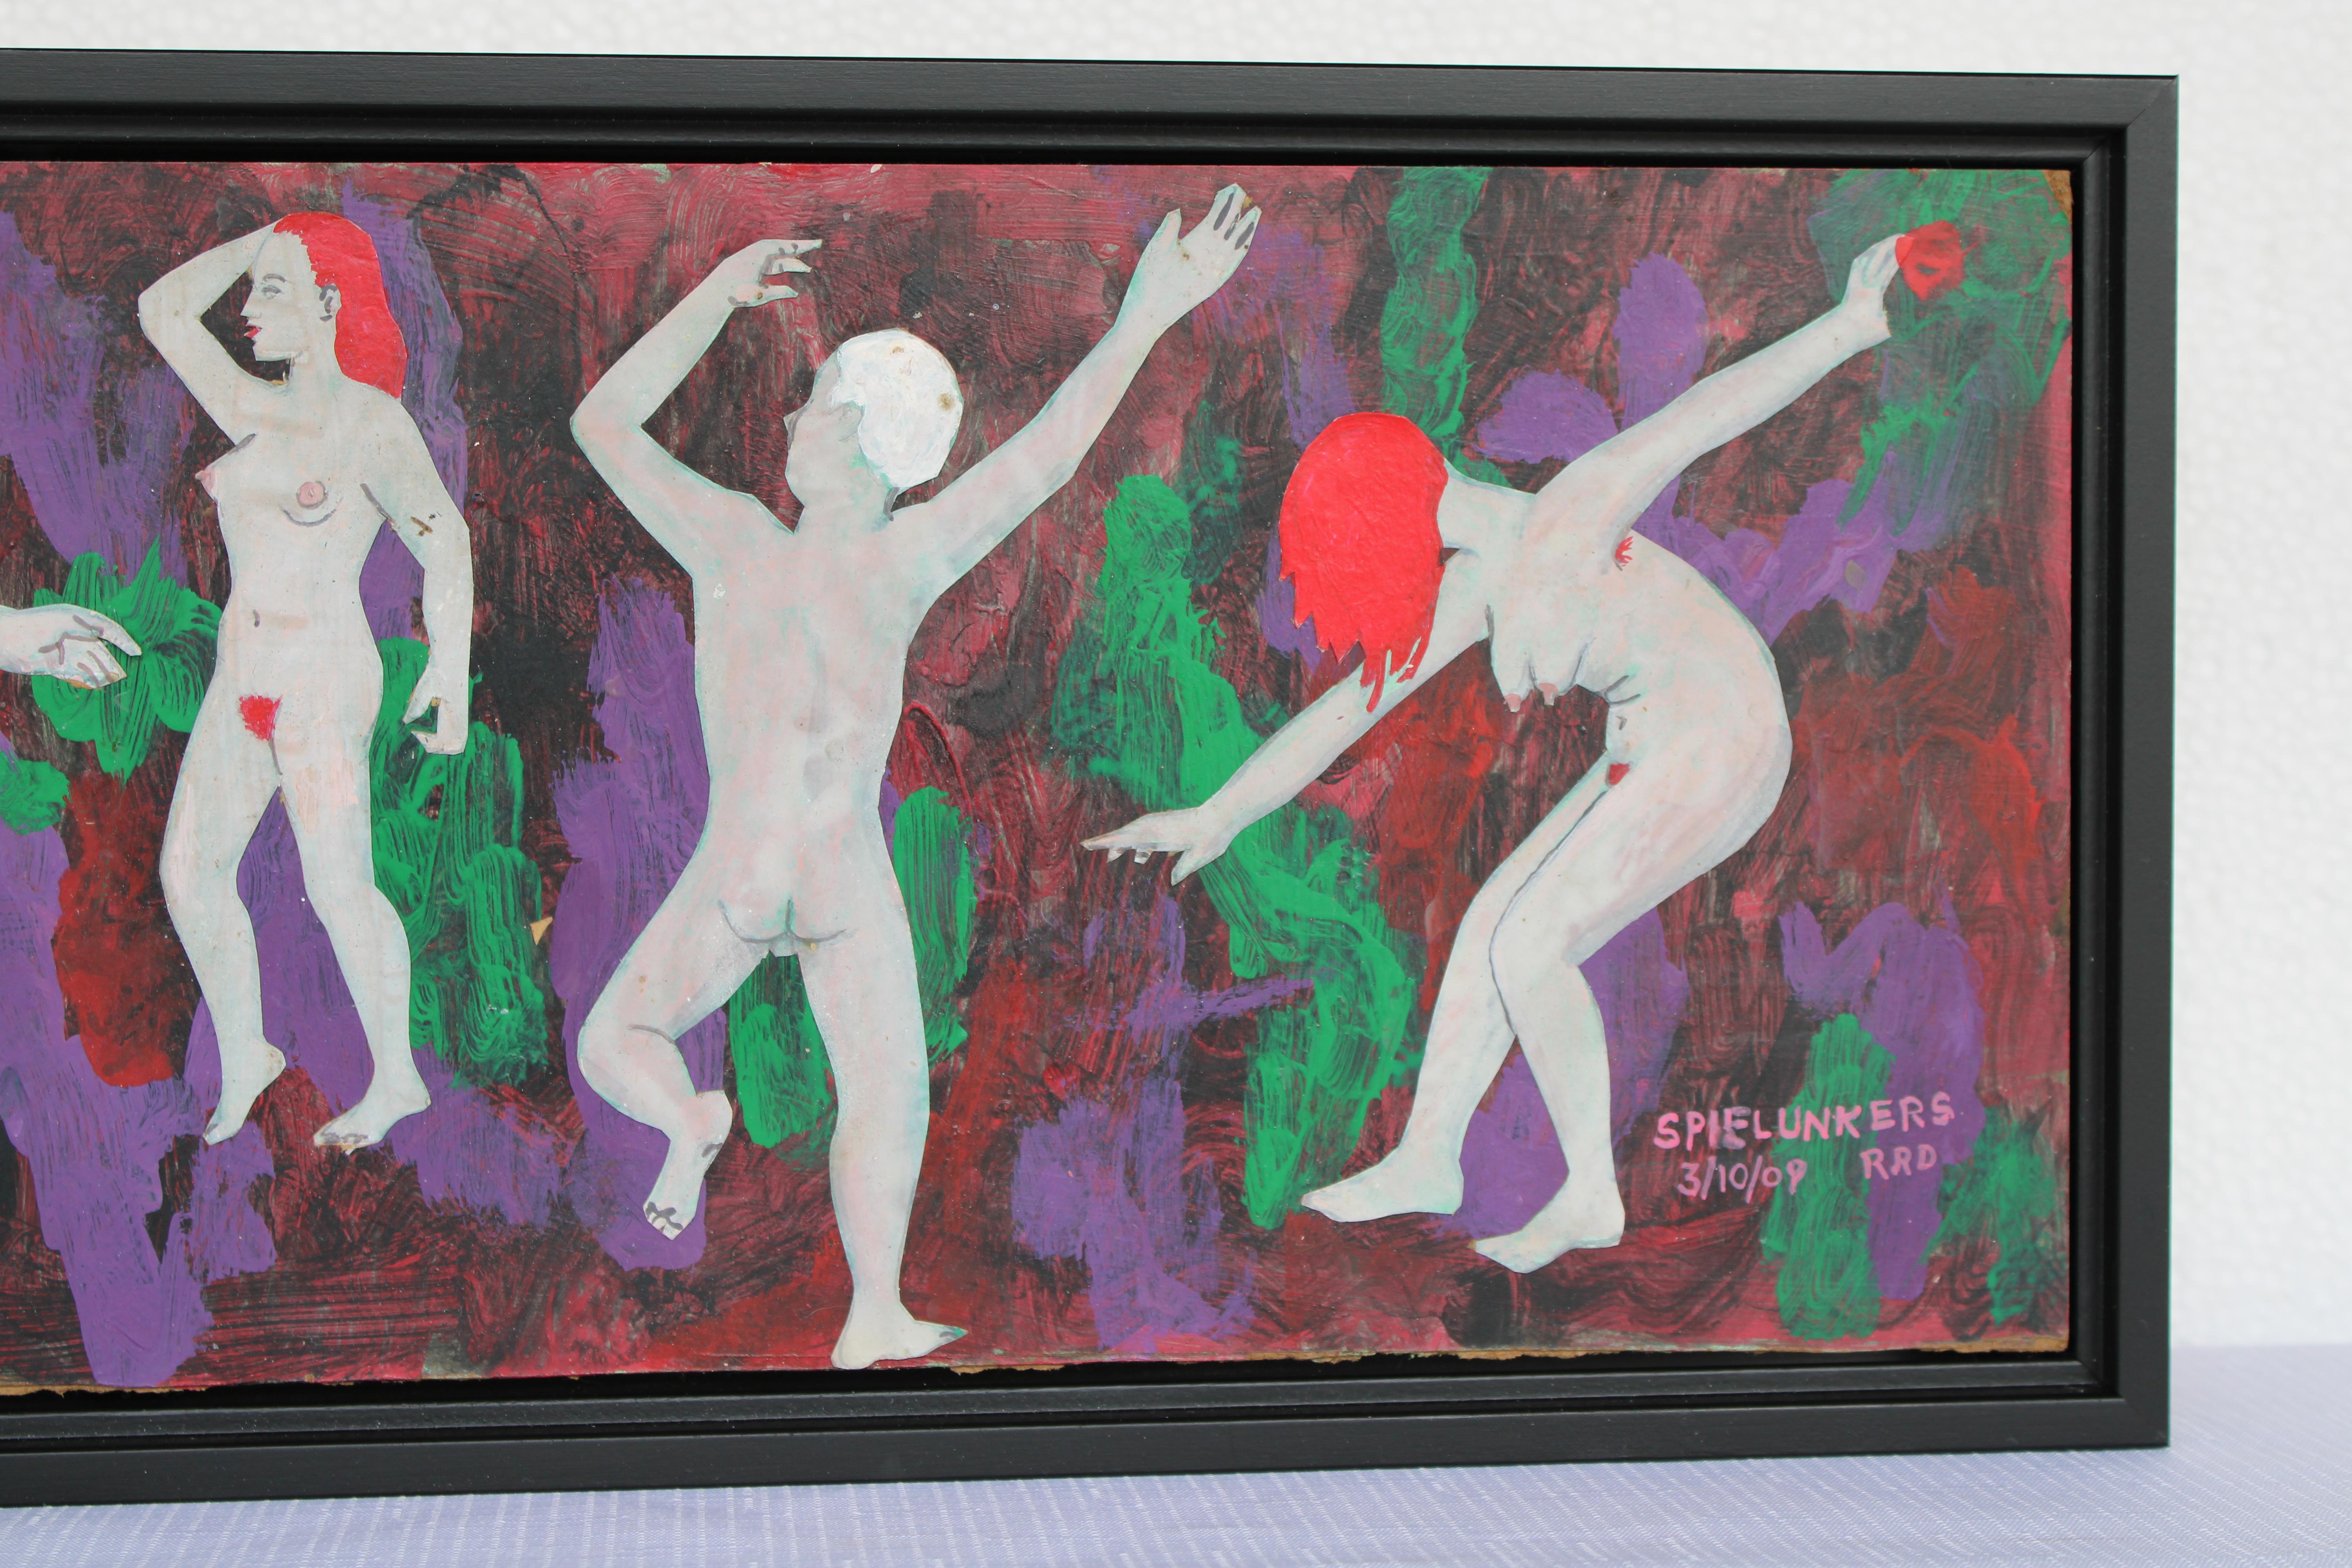 Outsider Art Painting titled Spielunkers, 3/10/09 RRD In Good Condition For Sale In Palm Springs, CA